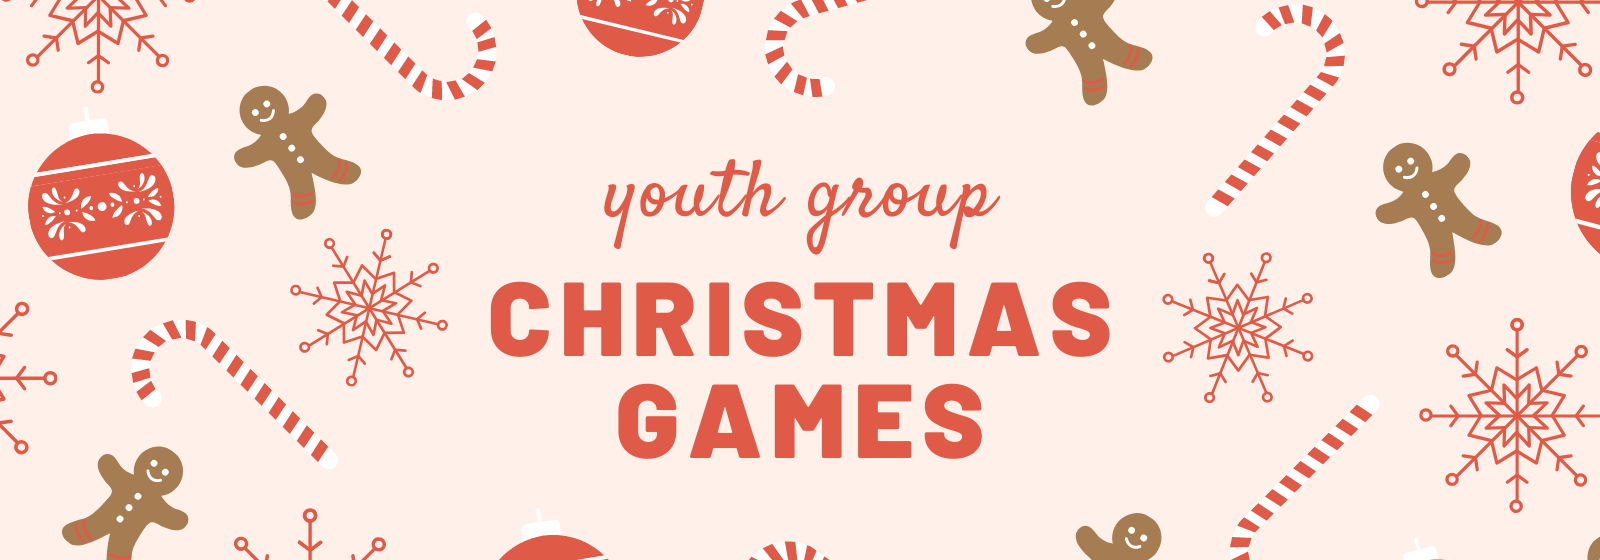 youth group christmas games